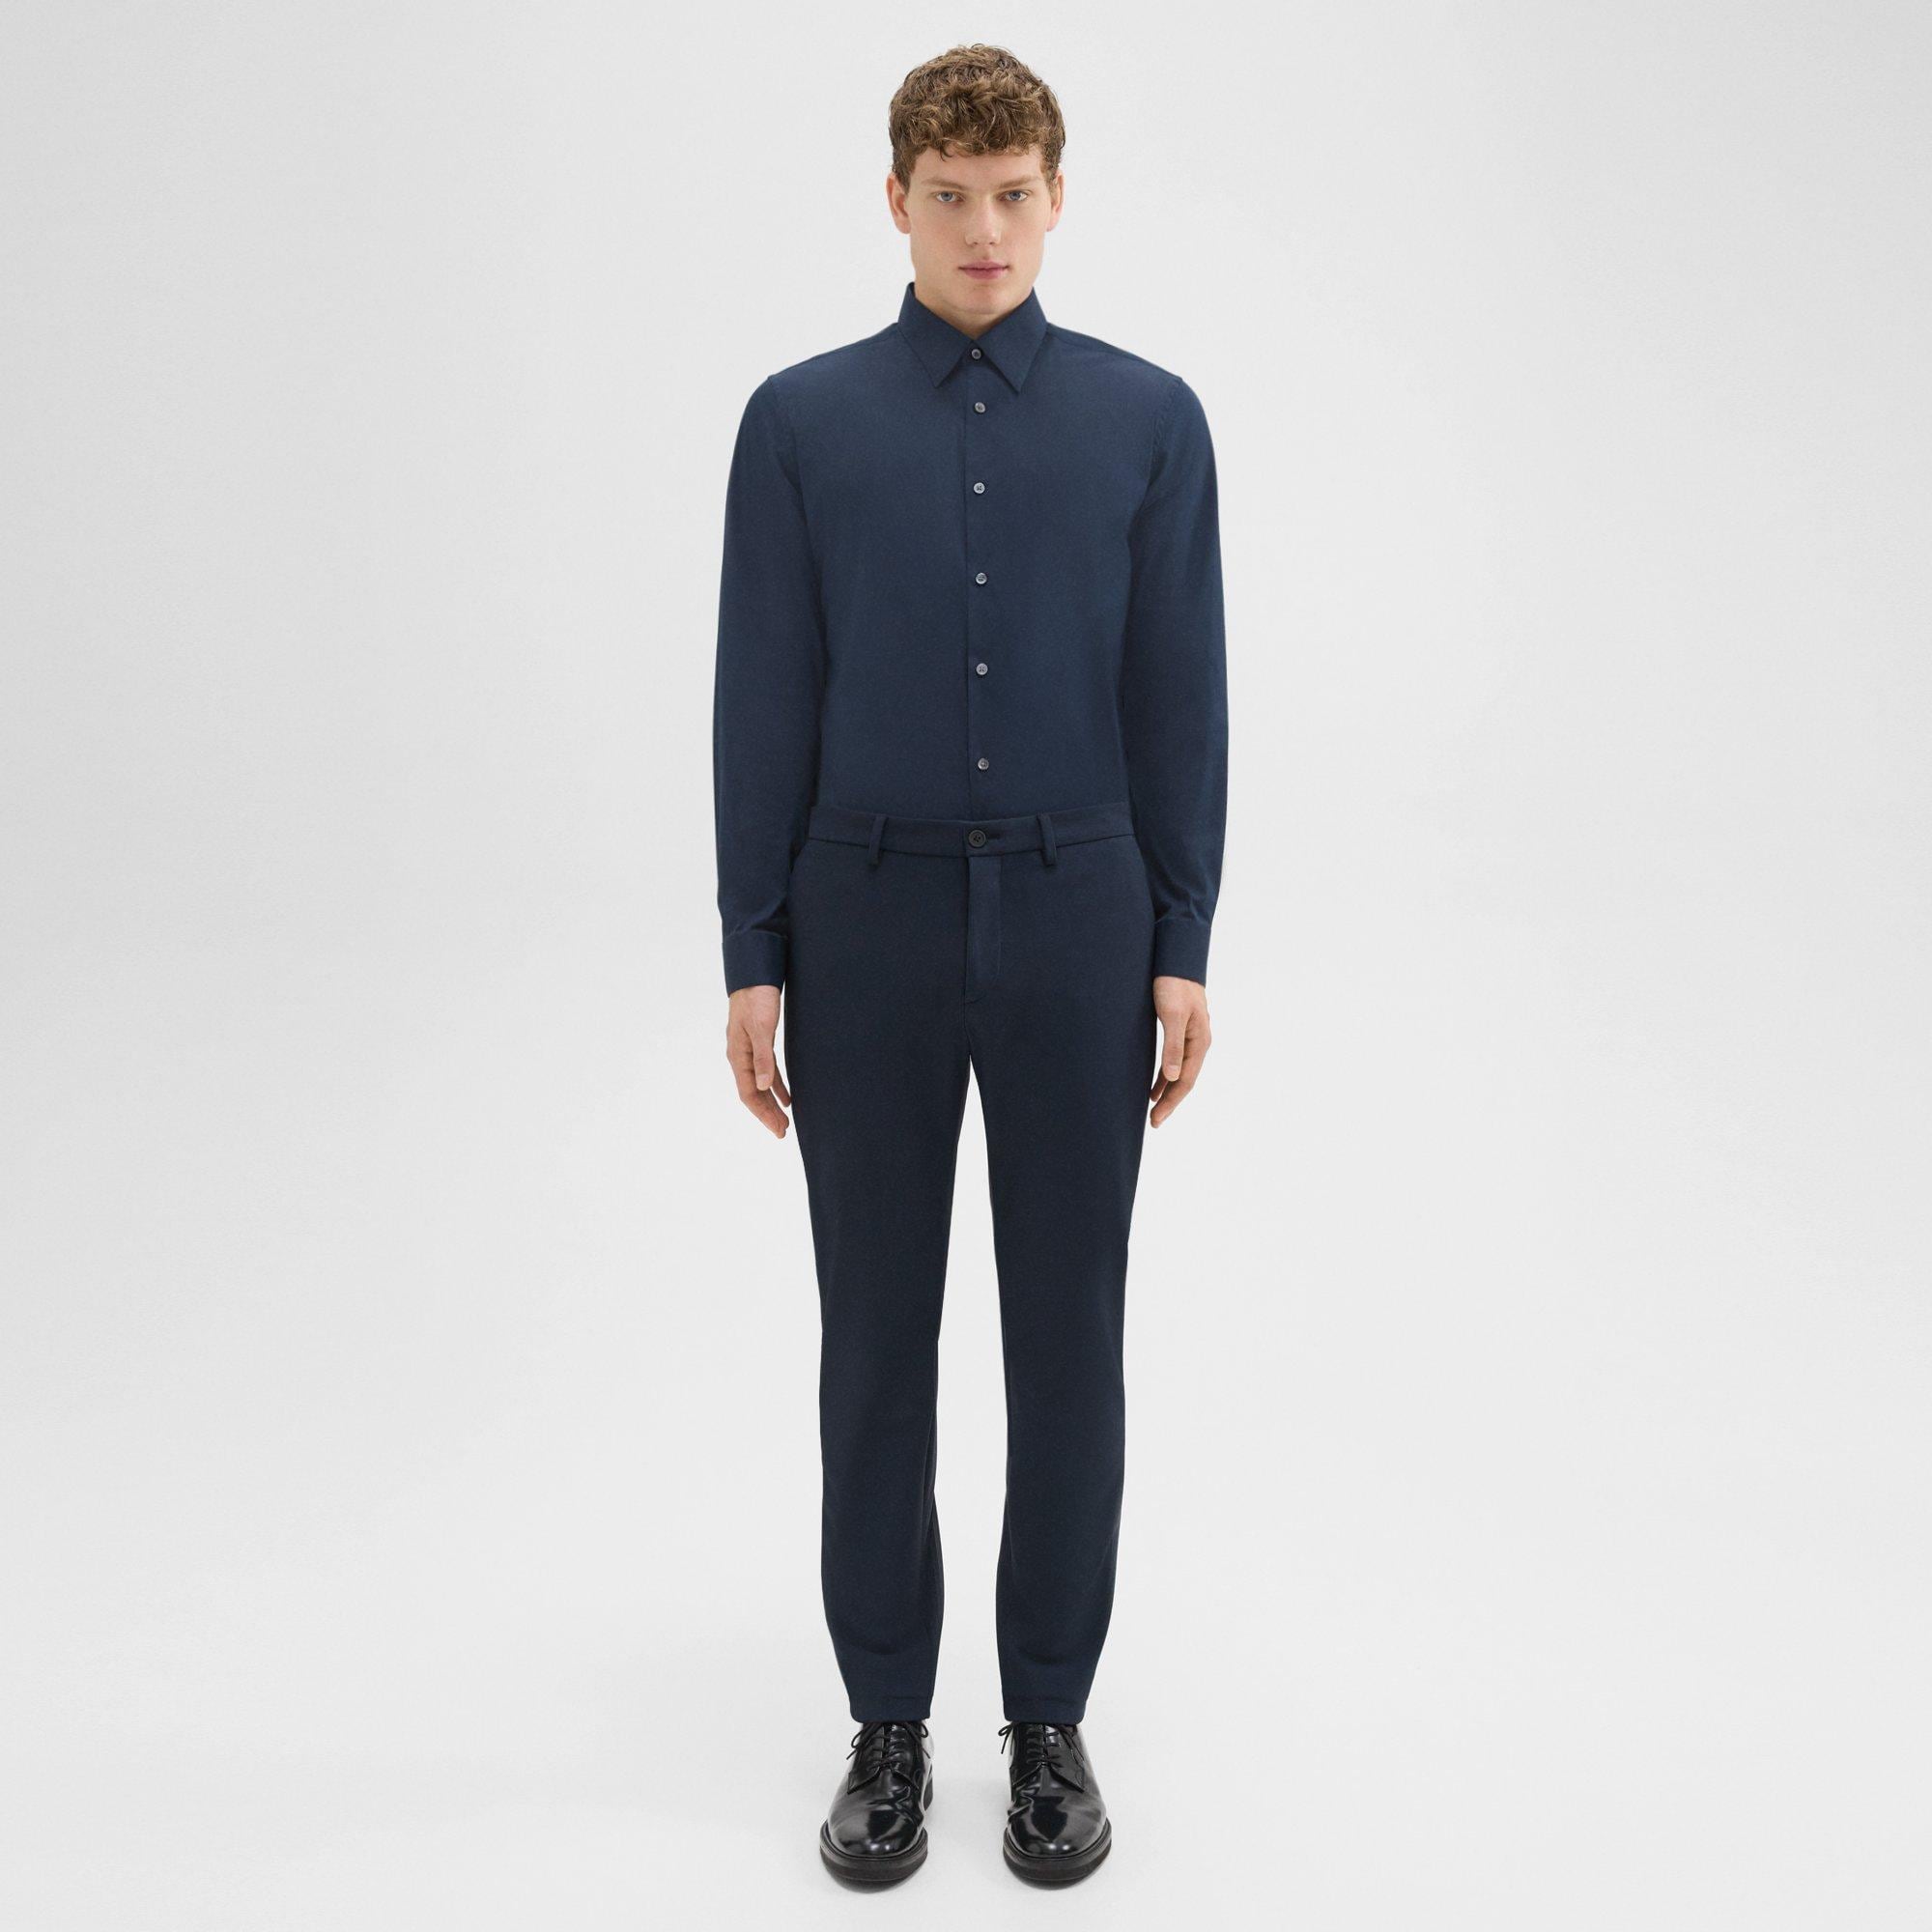 Marco Polo Full Length Pull On Ponte Pant In Navy